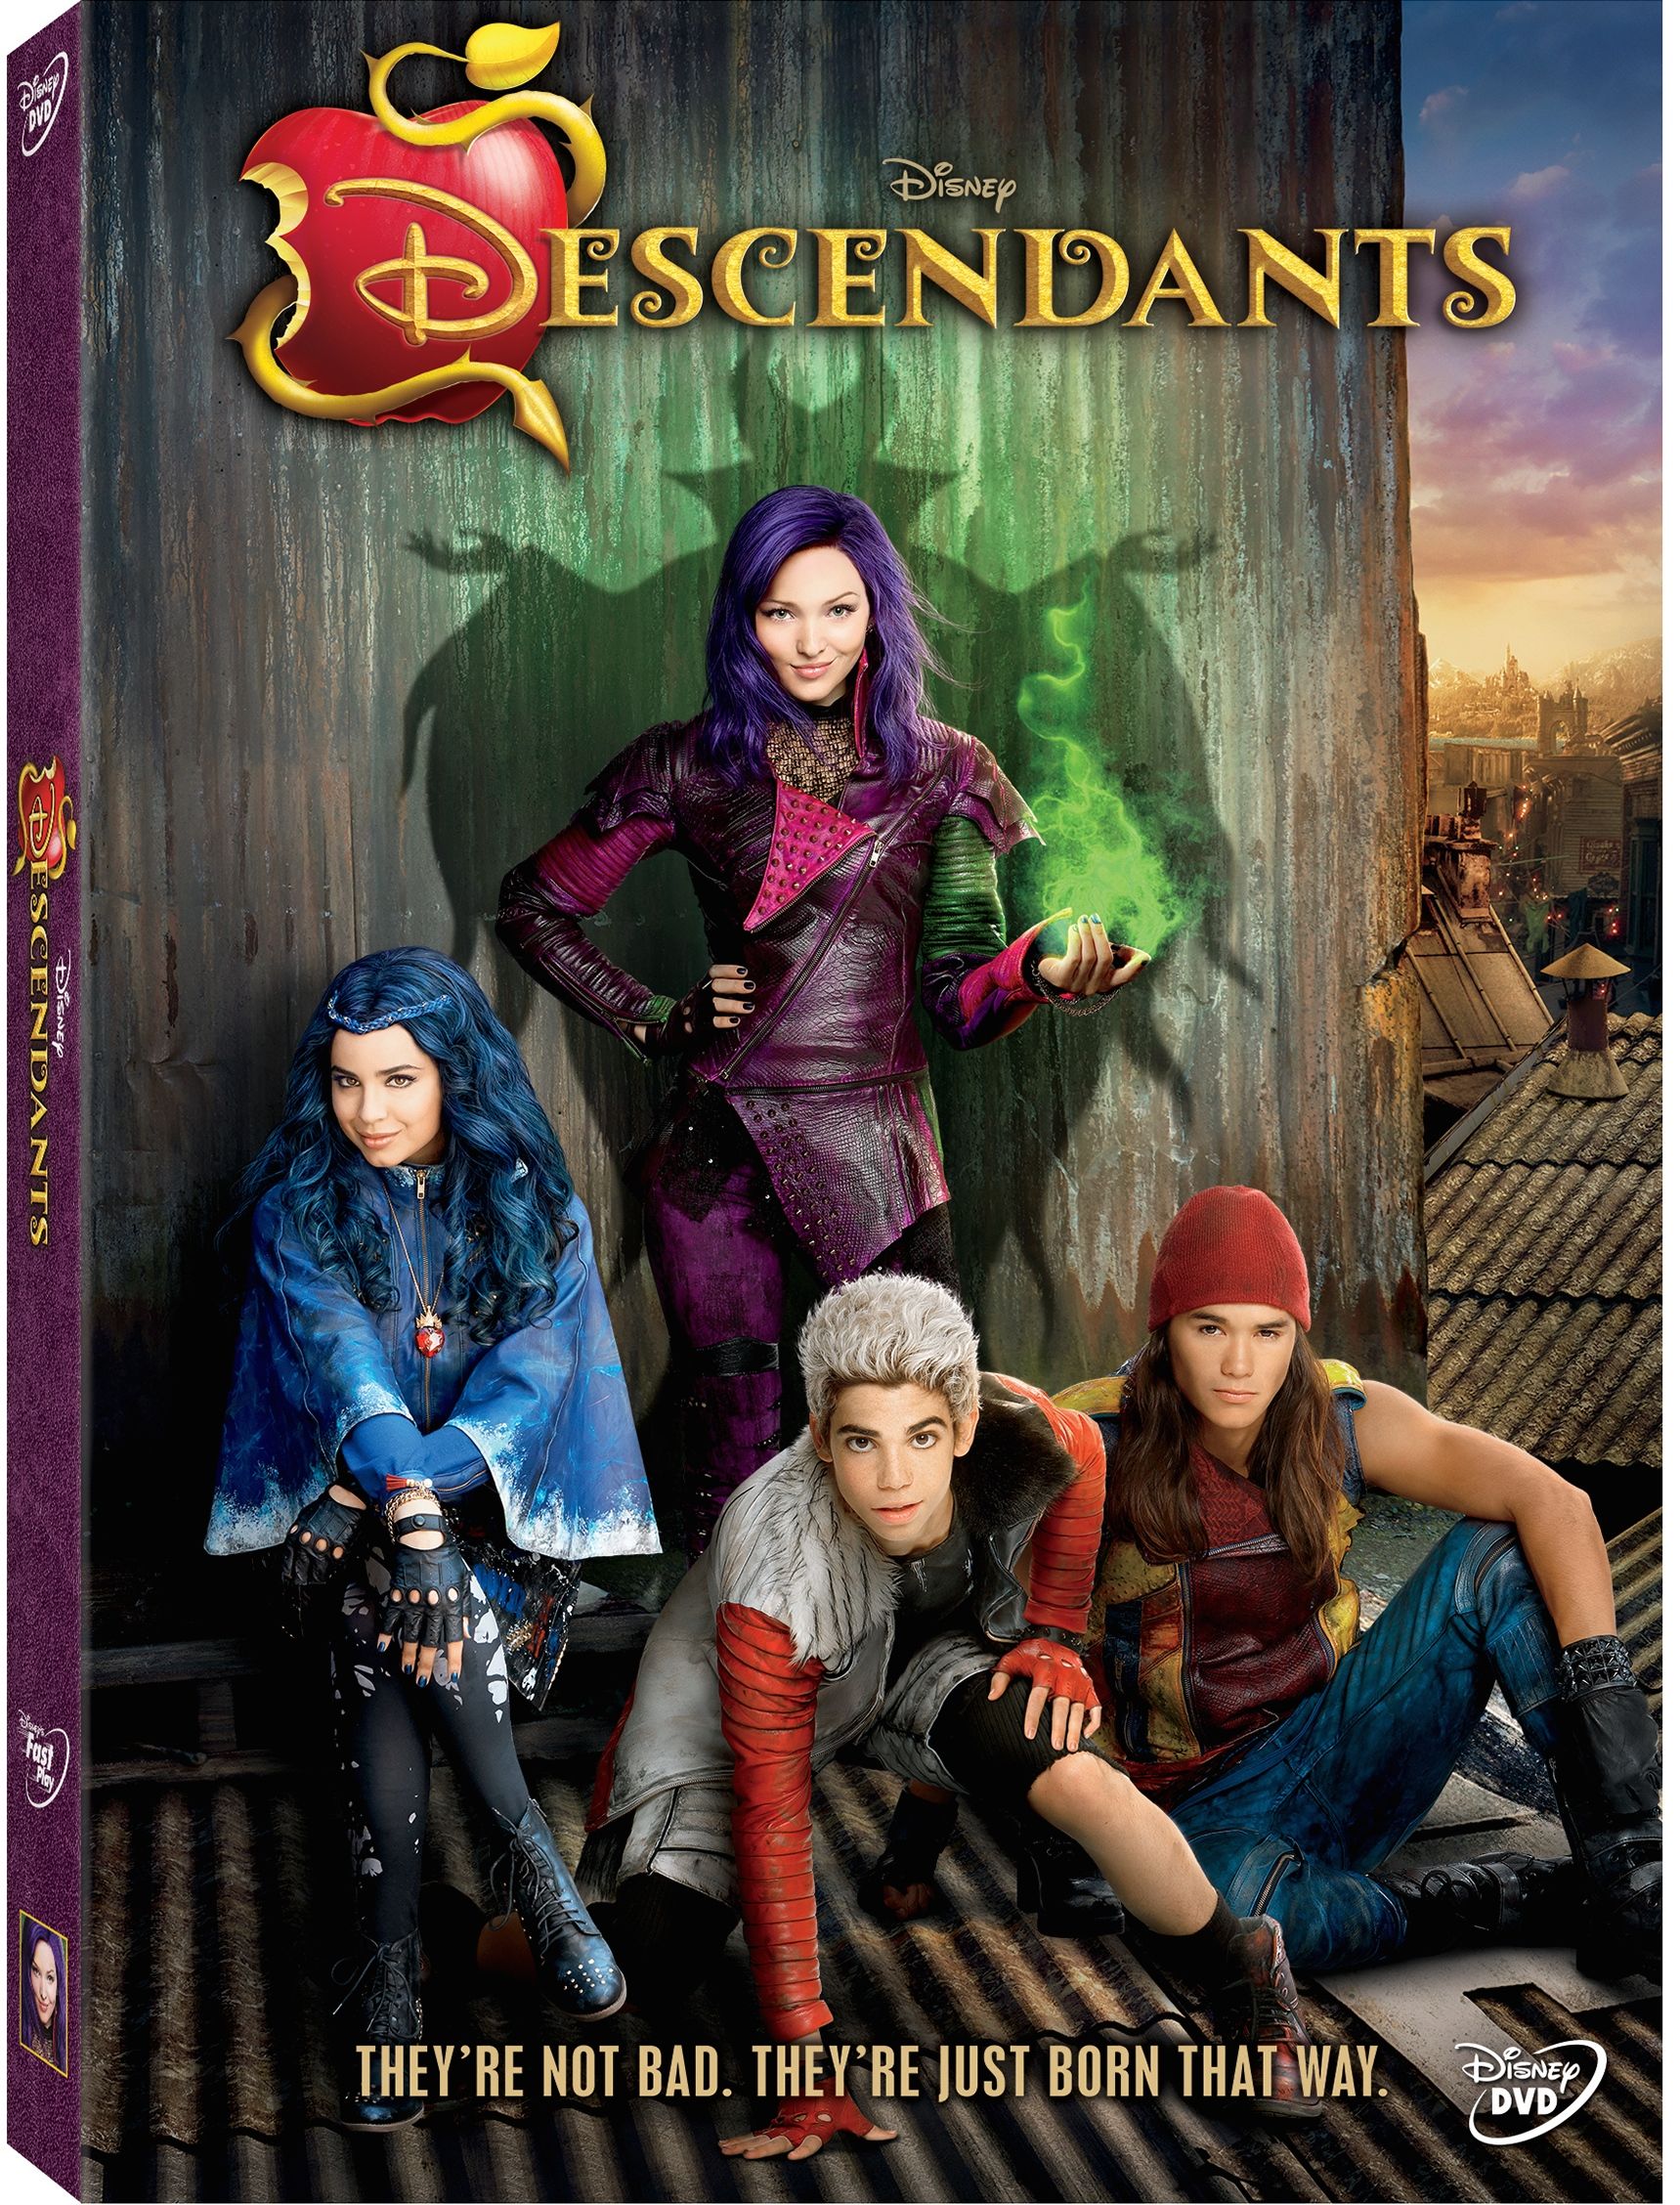 Descendants Coming to DVD July 31st!